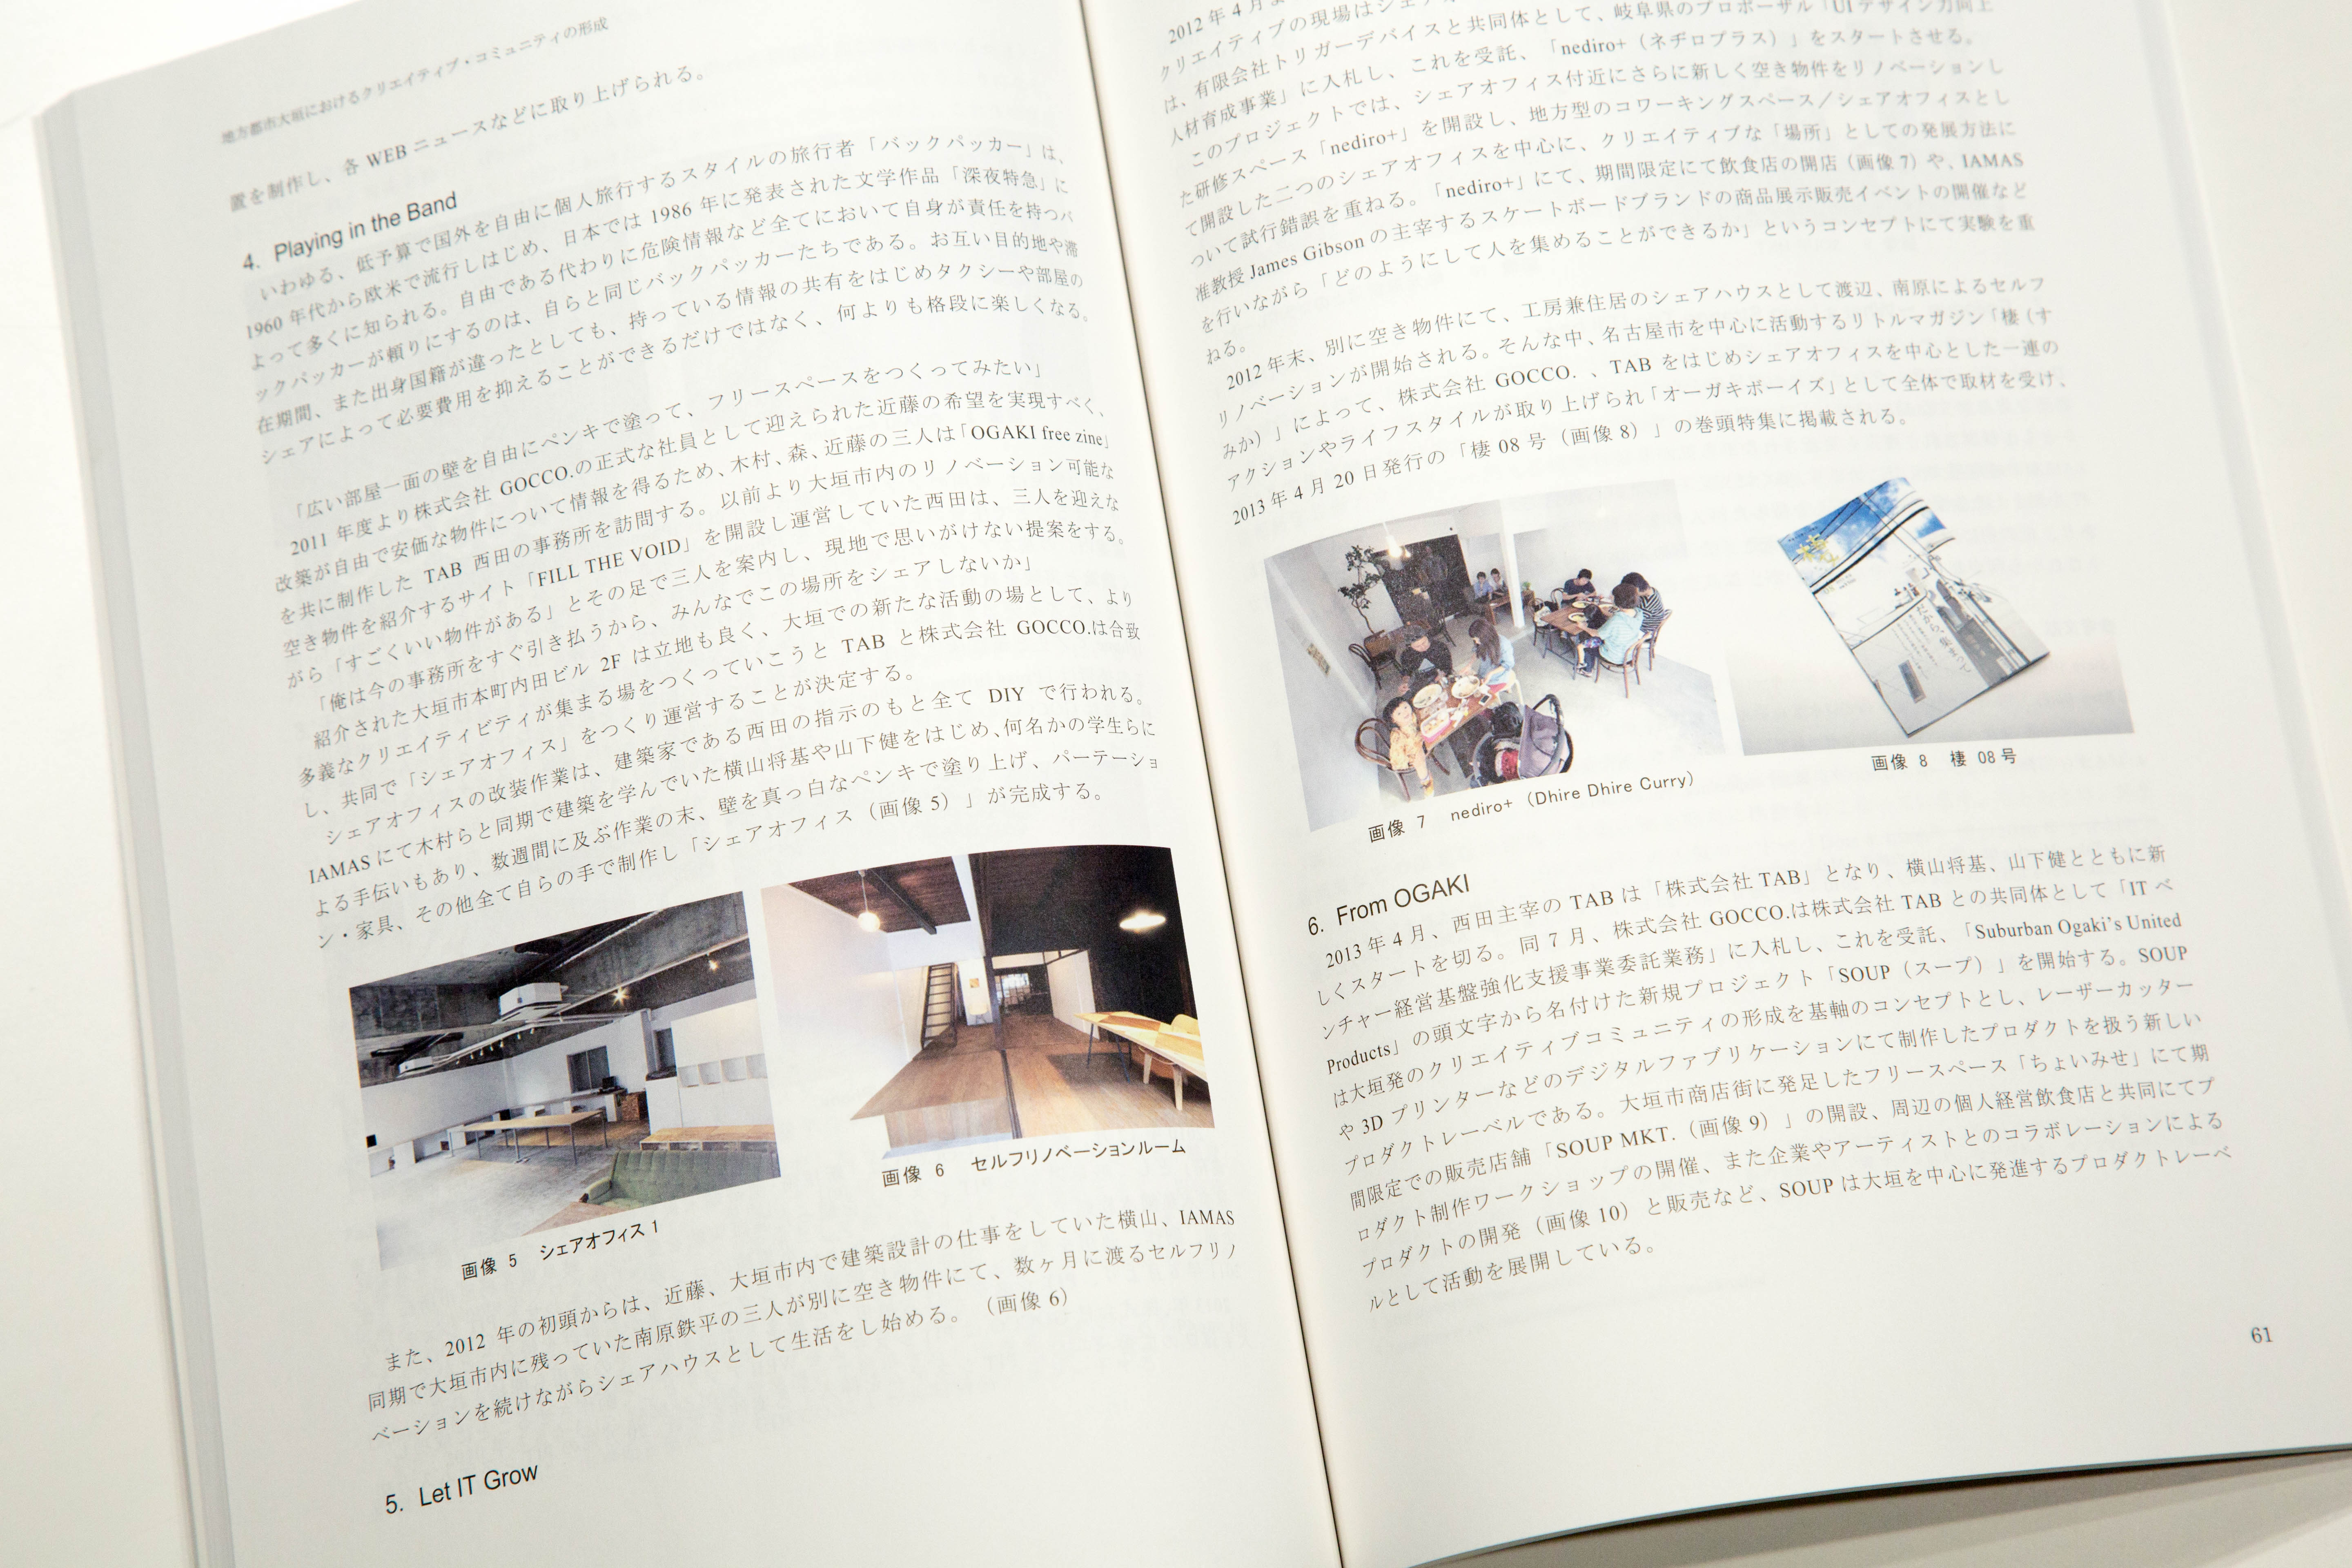 Journal of Institute of Advanced Media Arts and Sciences, Vol. 7`